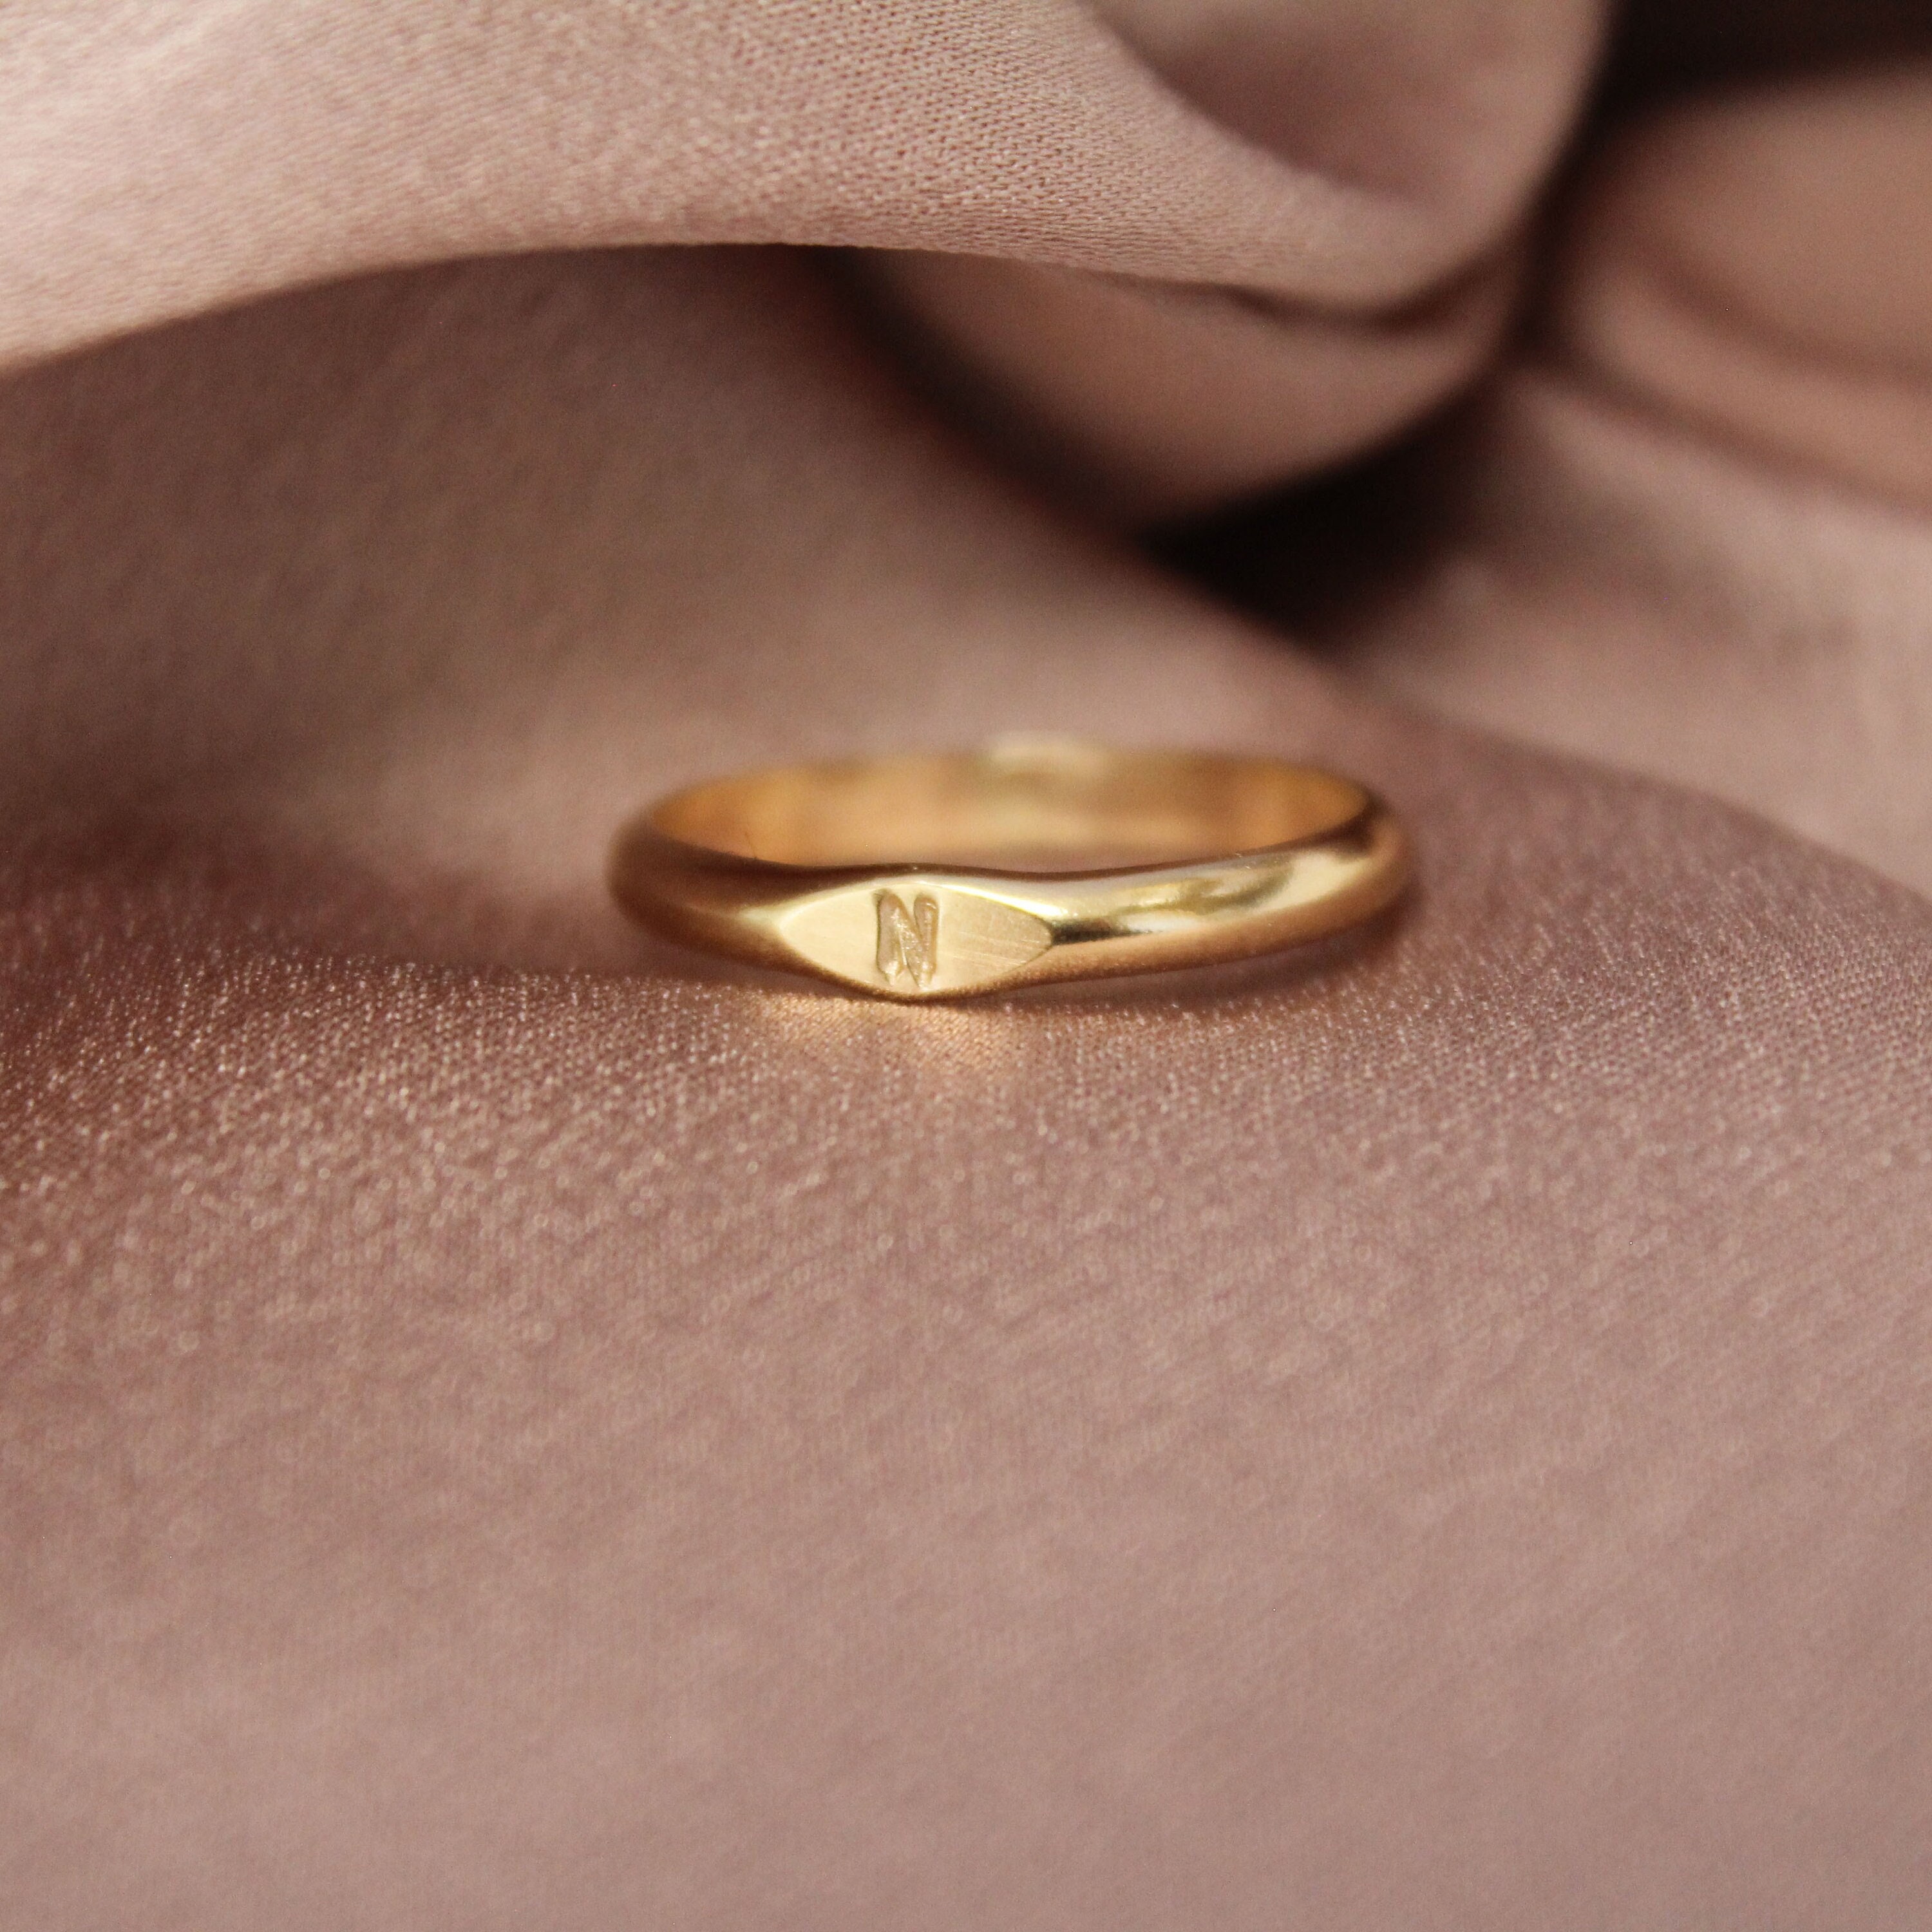 Buy Gold Ring, Signet Ring, Gold Signet Ring, Dainty Gold Ring, 14K Gold  Ring, Minimalist Gold Ring, Signet Ring for Women, Pinky Ring Online in  India - Etsy